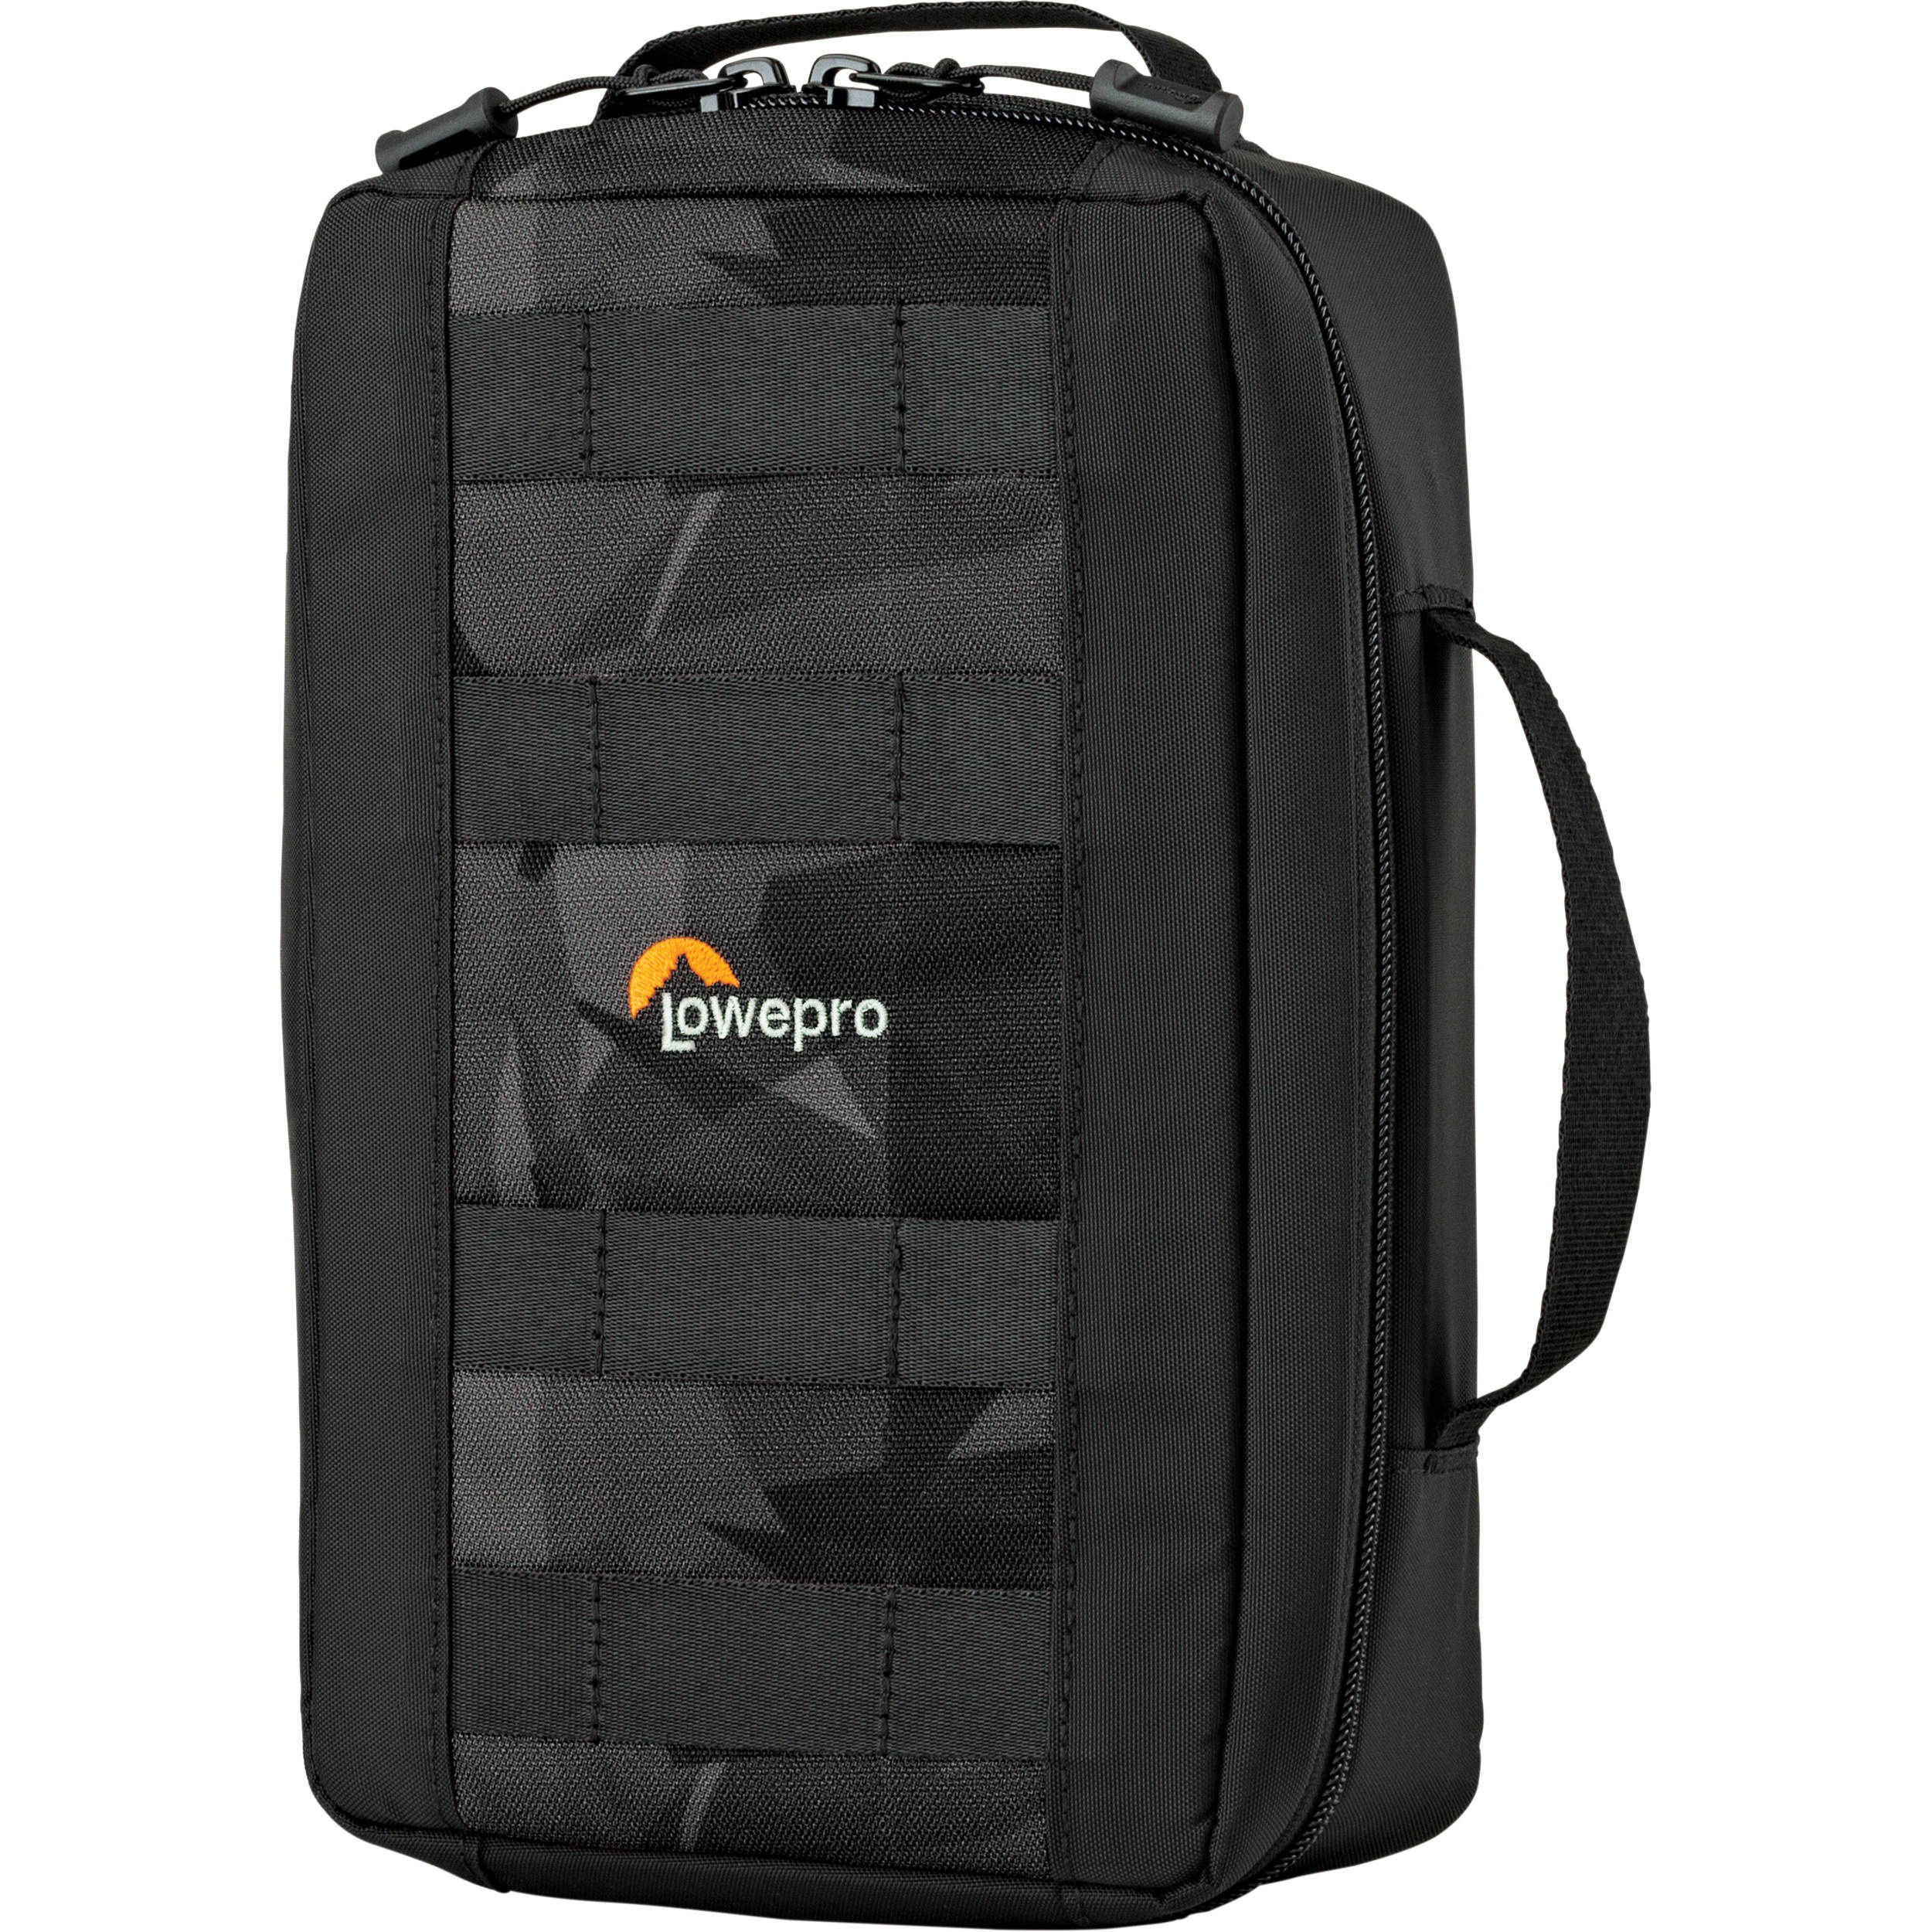 Lowepro Viewpoint CS 80 Case for Action Cameras (Black)